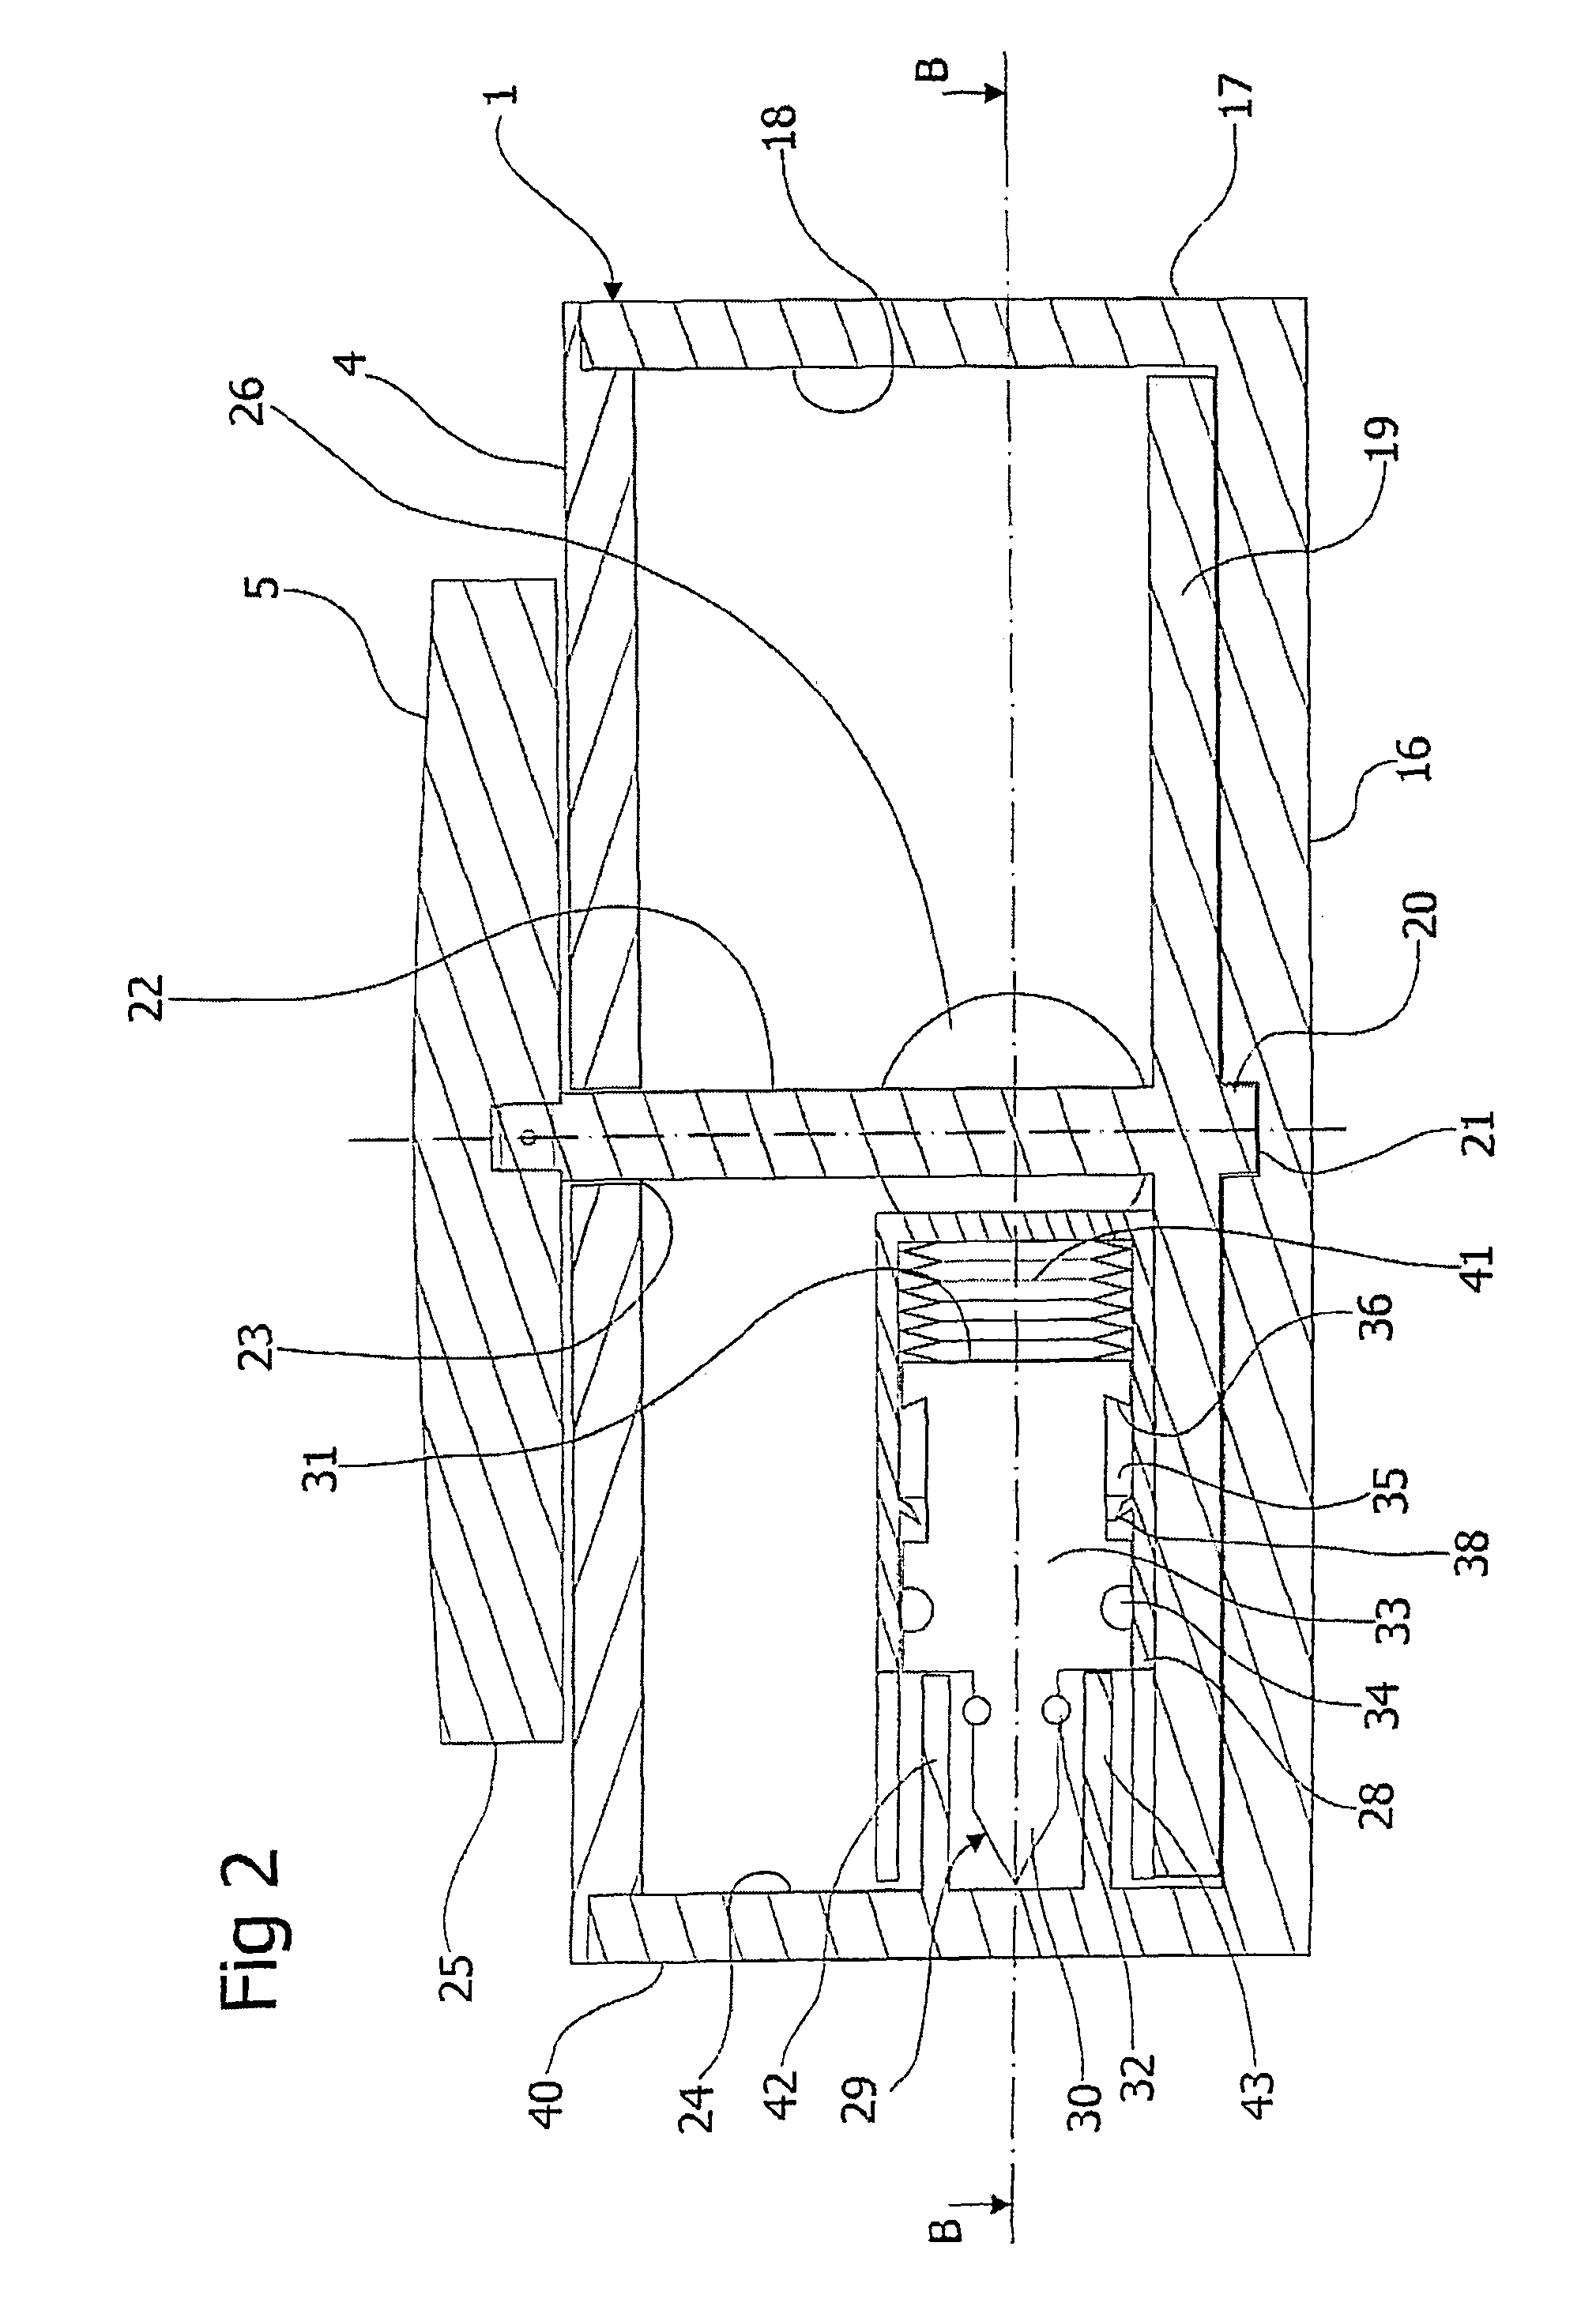 Apparatus for applying and removing closing means from an end portion of a tubular element and the use thereof in peritoneal dialysis